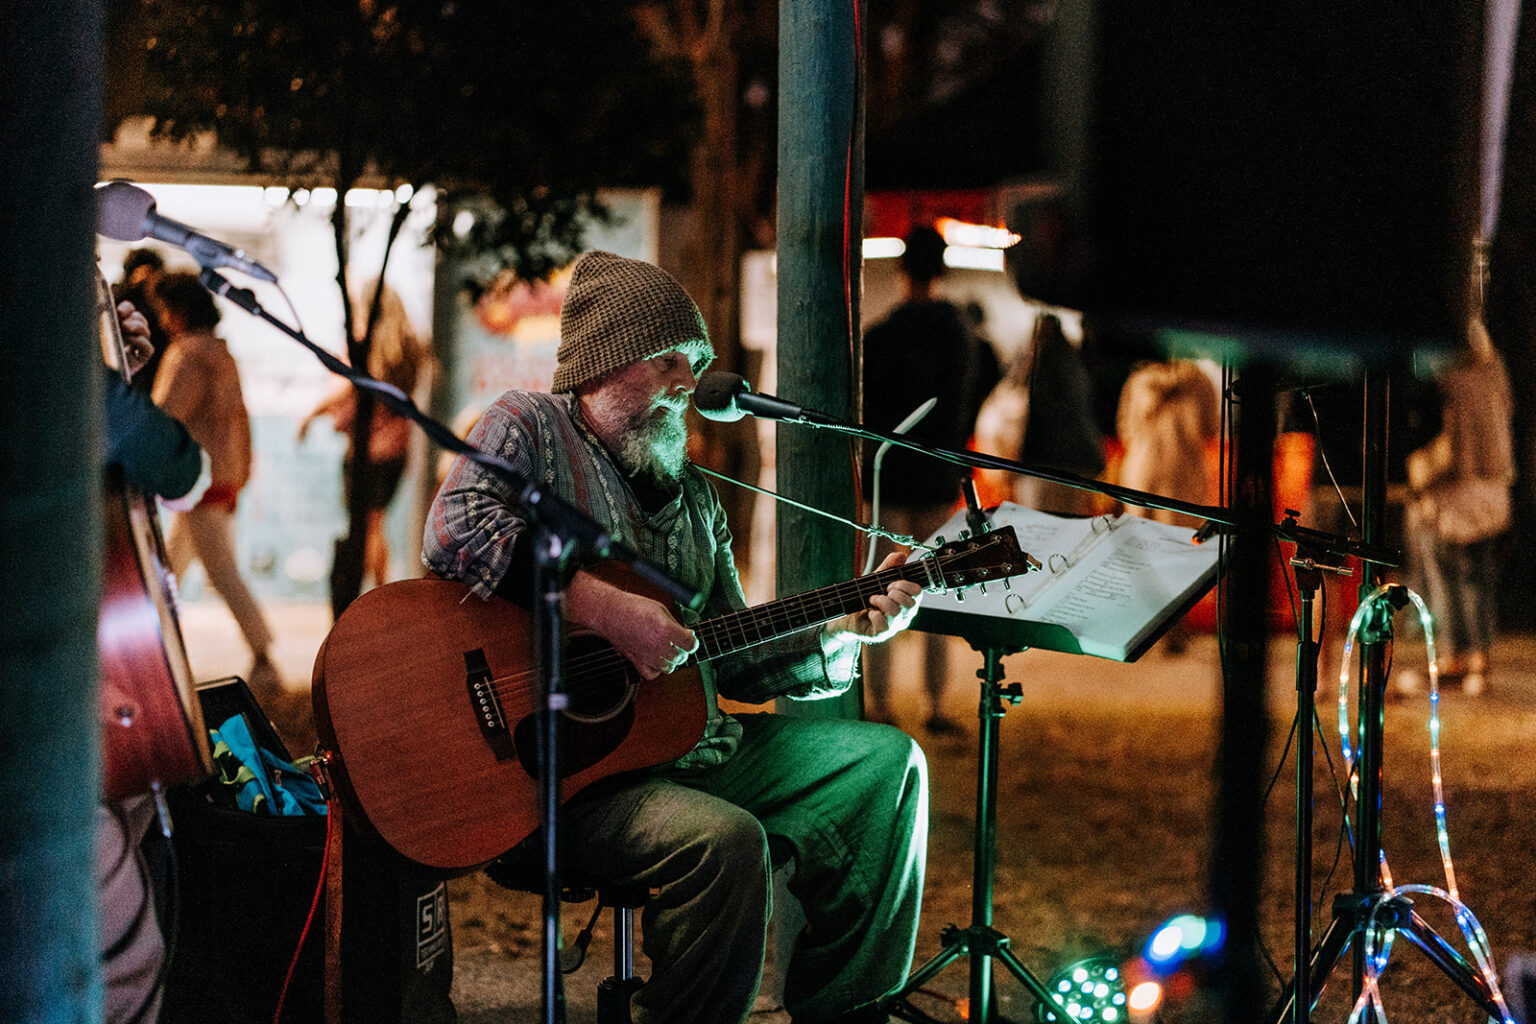 Live music at the Twilight Food Markets